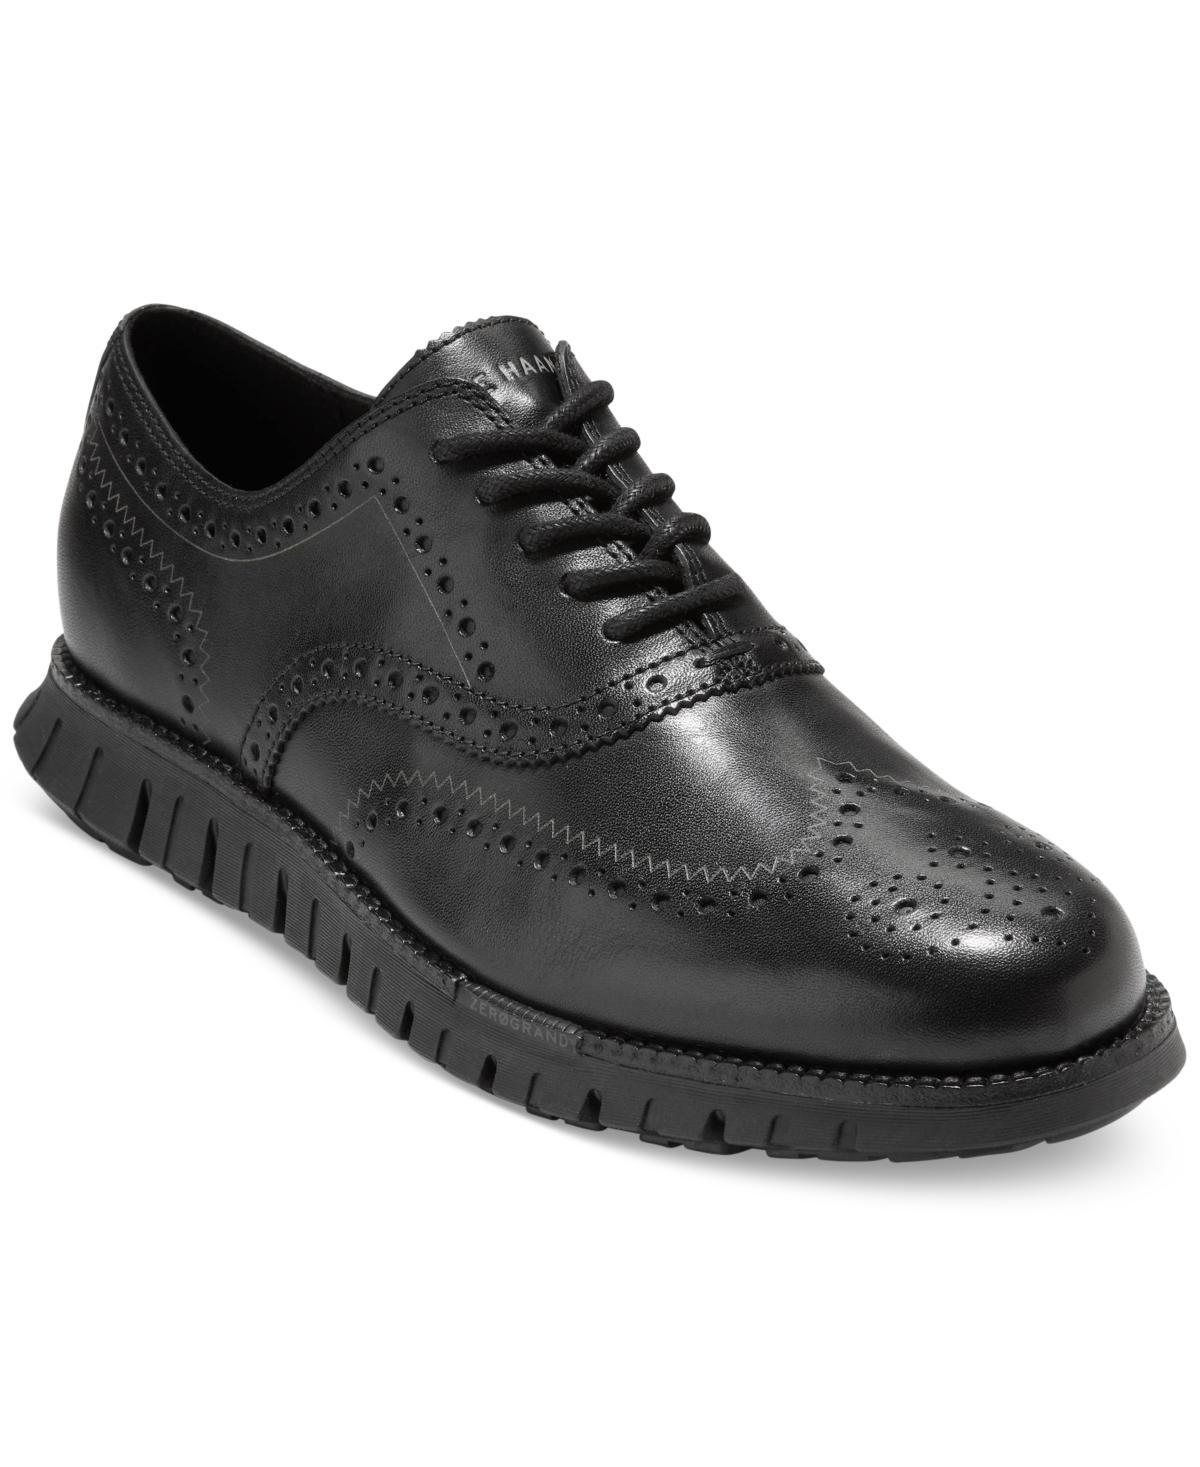 Mens Zerogrand Remastered Wingtip Oxfords Product Image